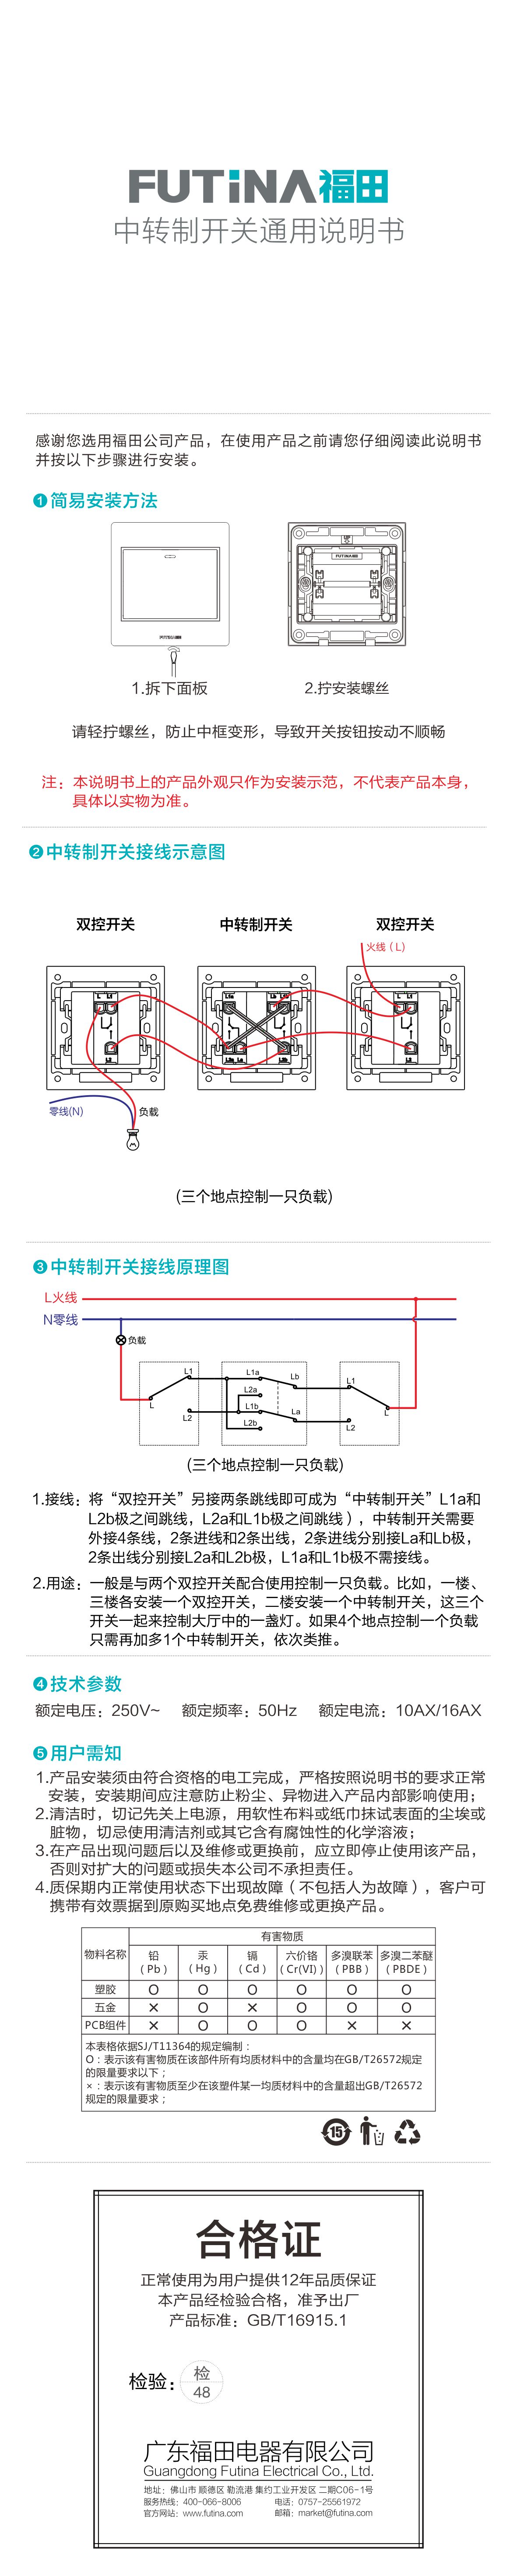 General manual of transfer system switch